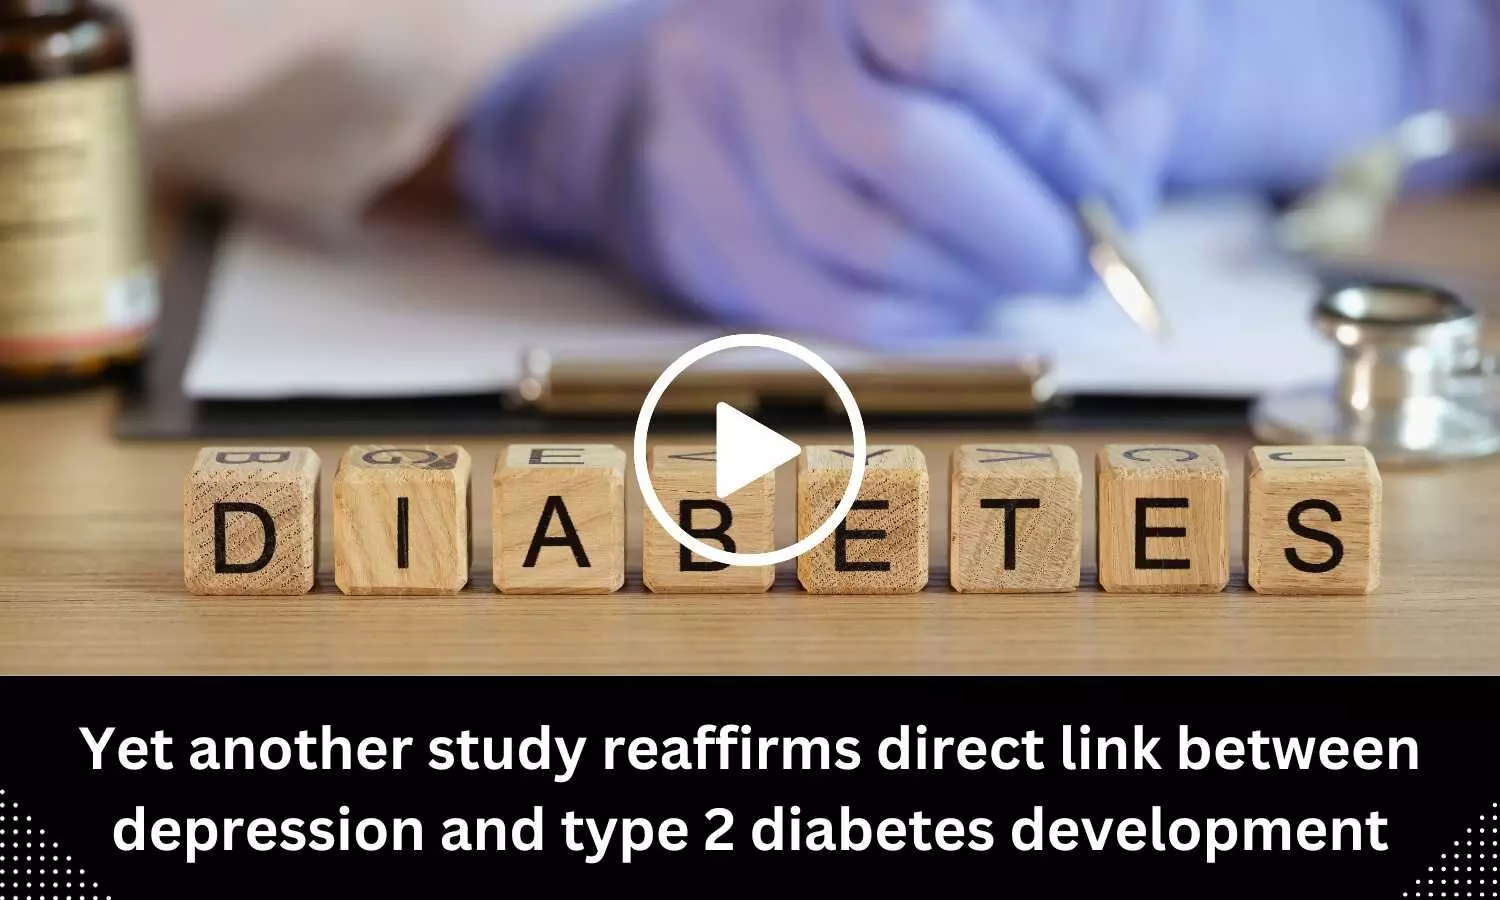 Yet another study reaffirms direct link between depression and type 2 diabetes development